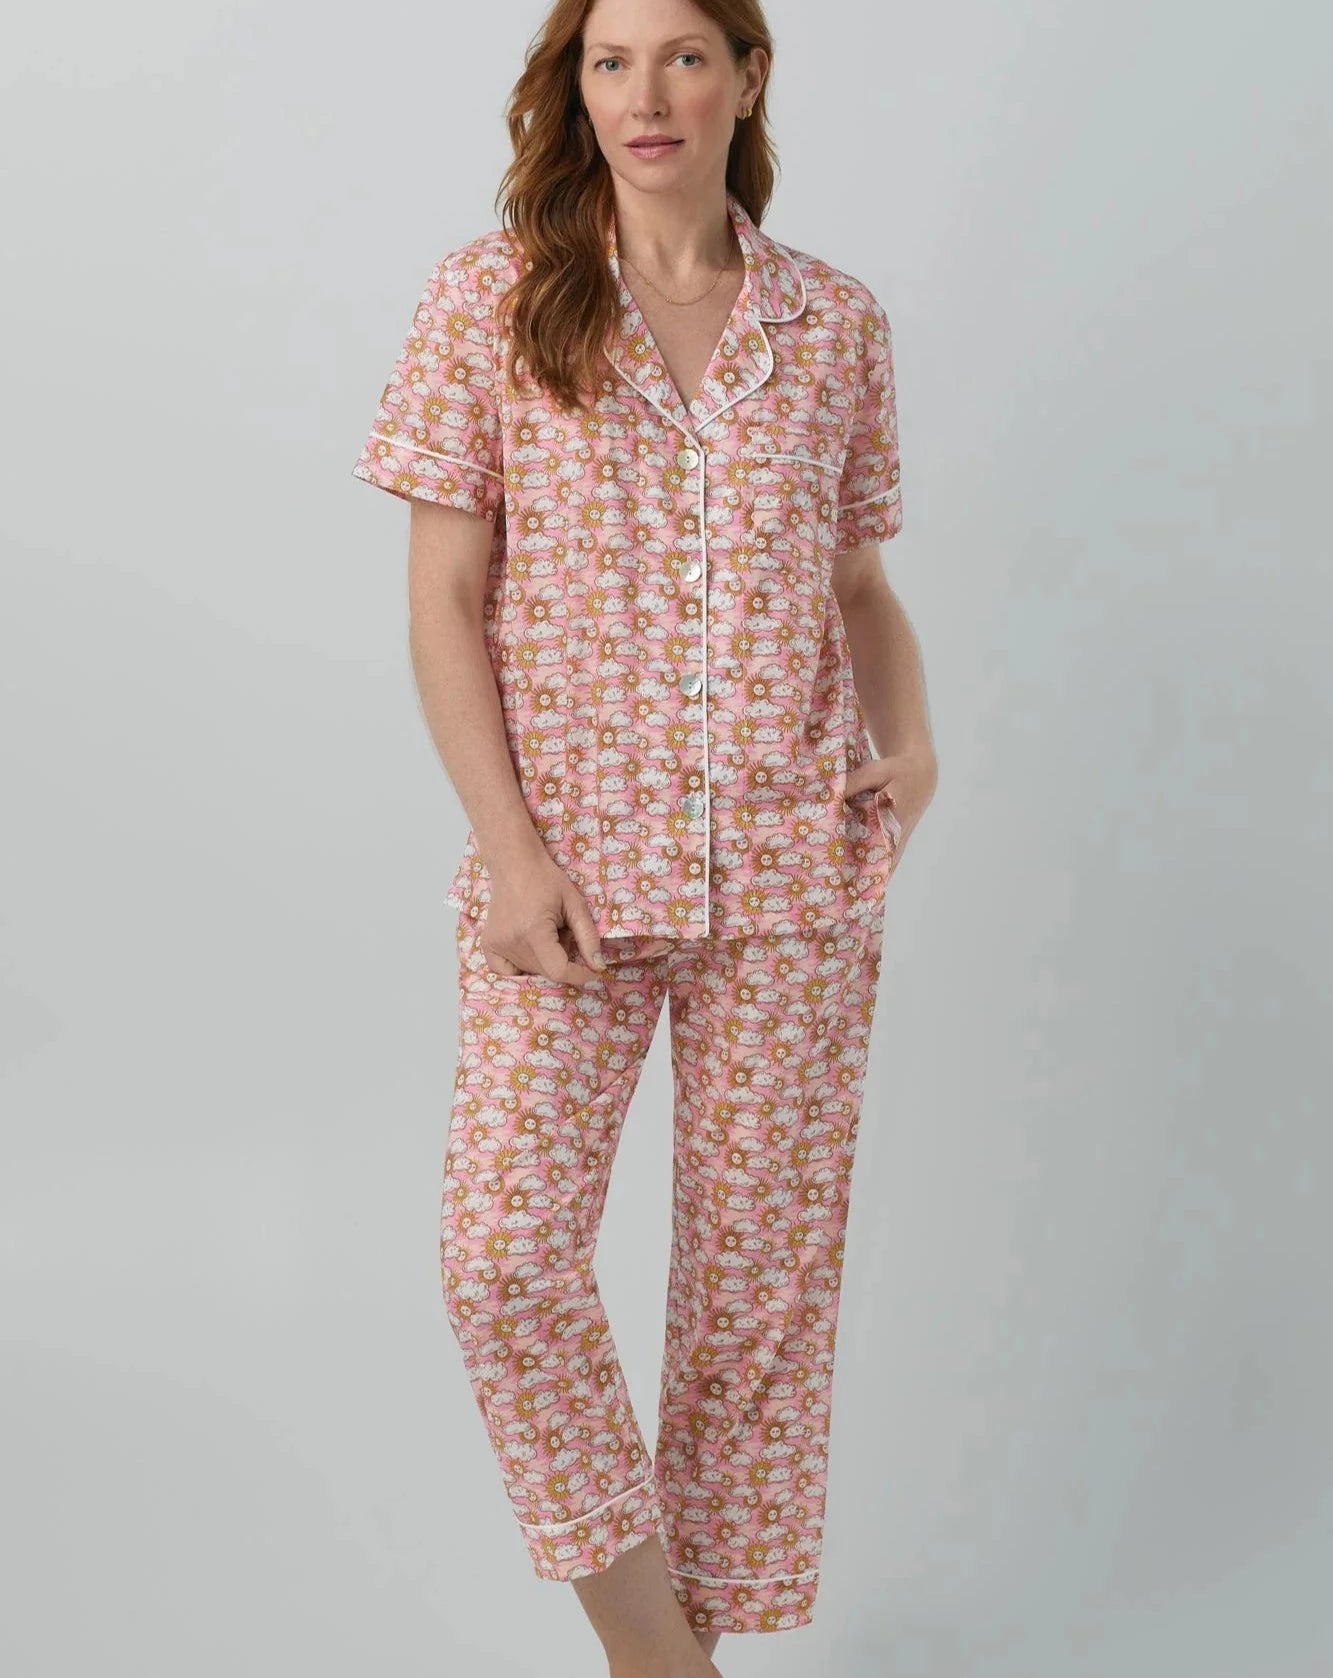 Follow The Sun Cropped Cotton PJ Set Made With Liberty Fabric - Beestung Lingerie